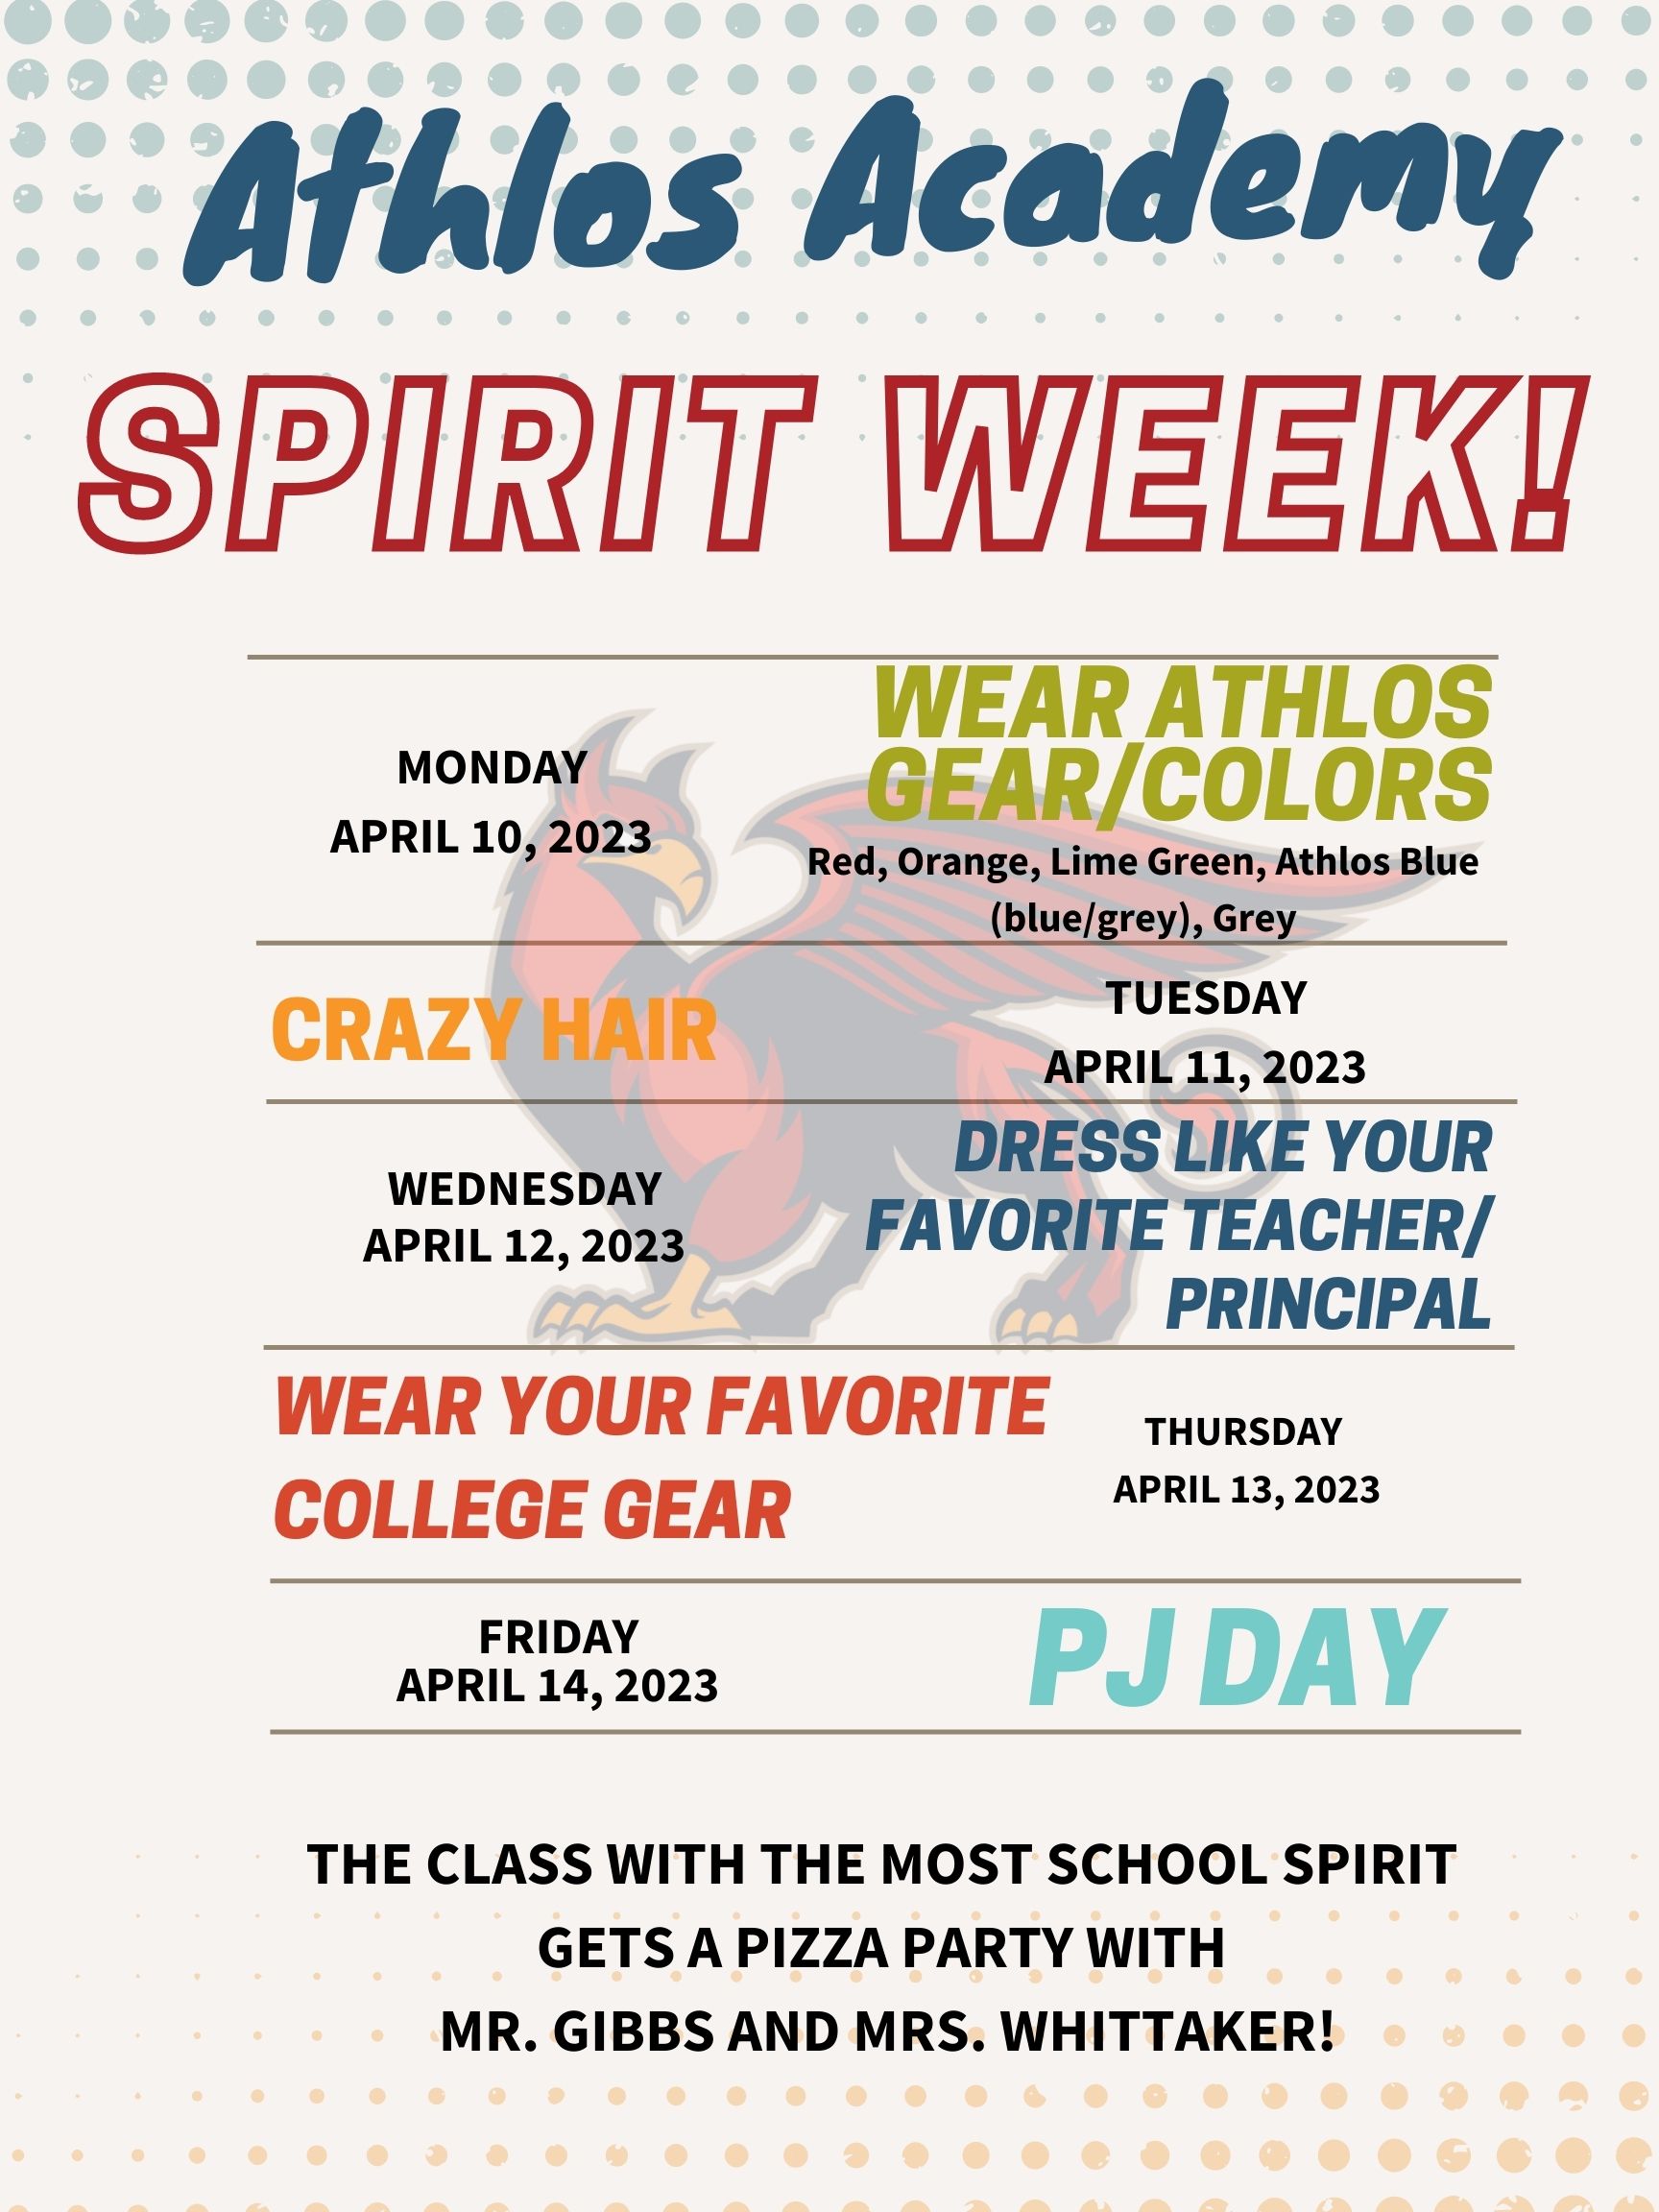 Flyer listing themes and dates for spirit week